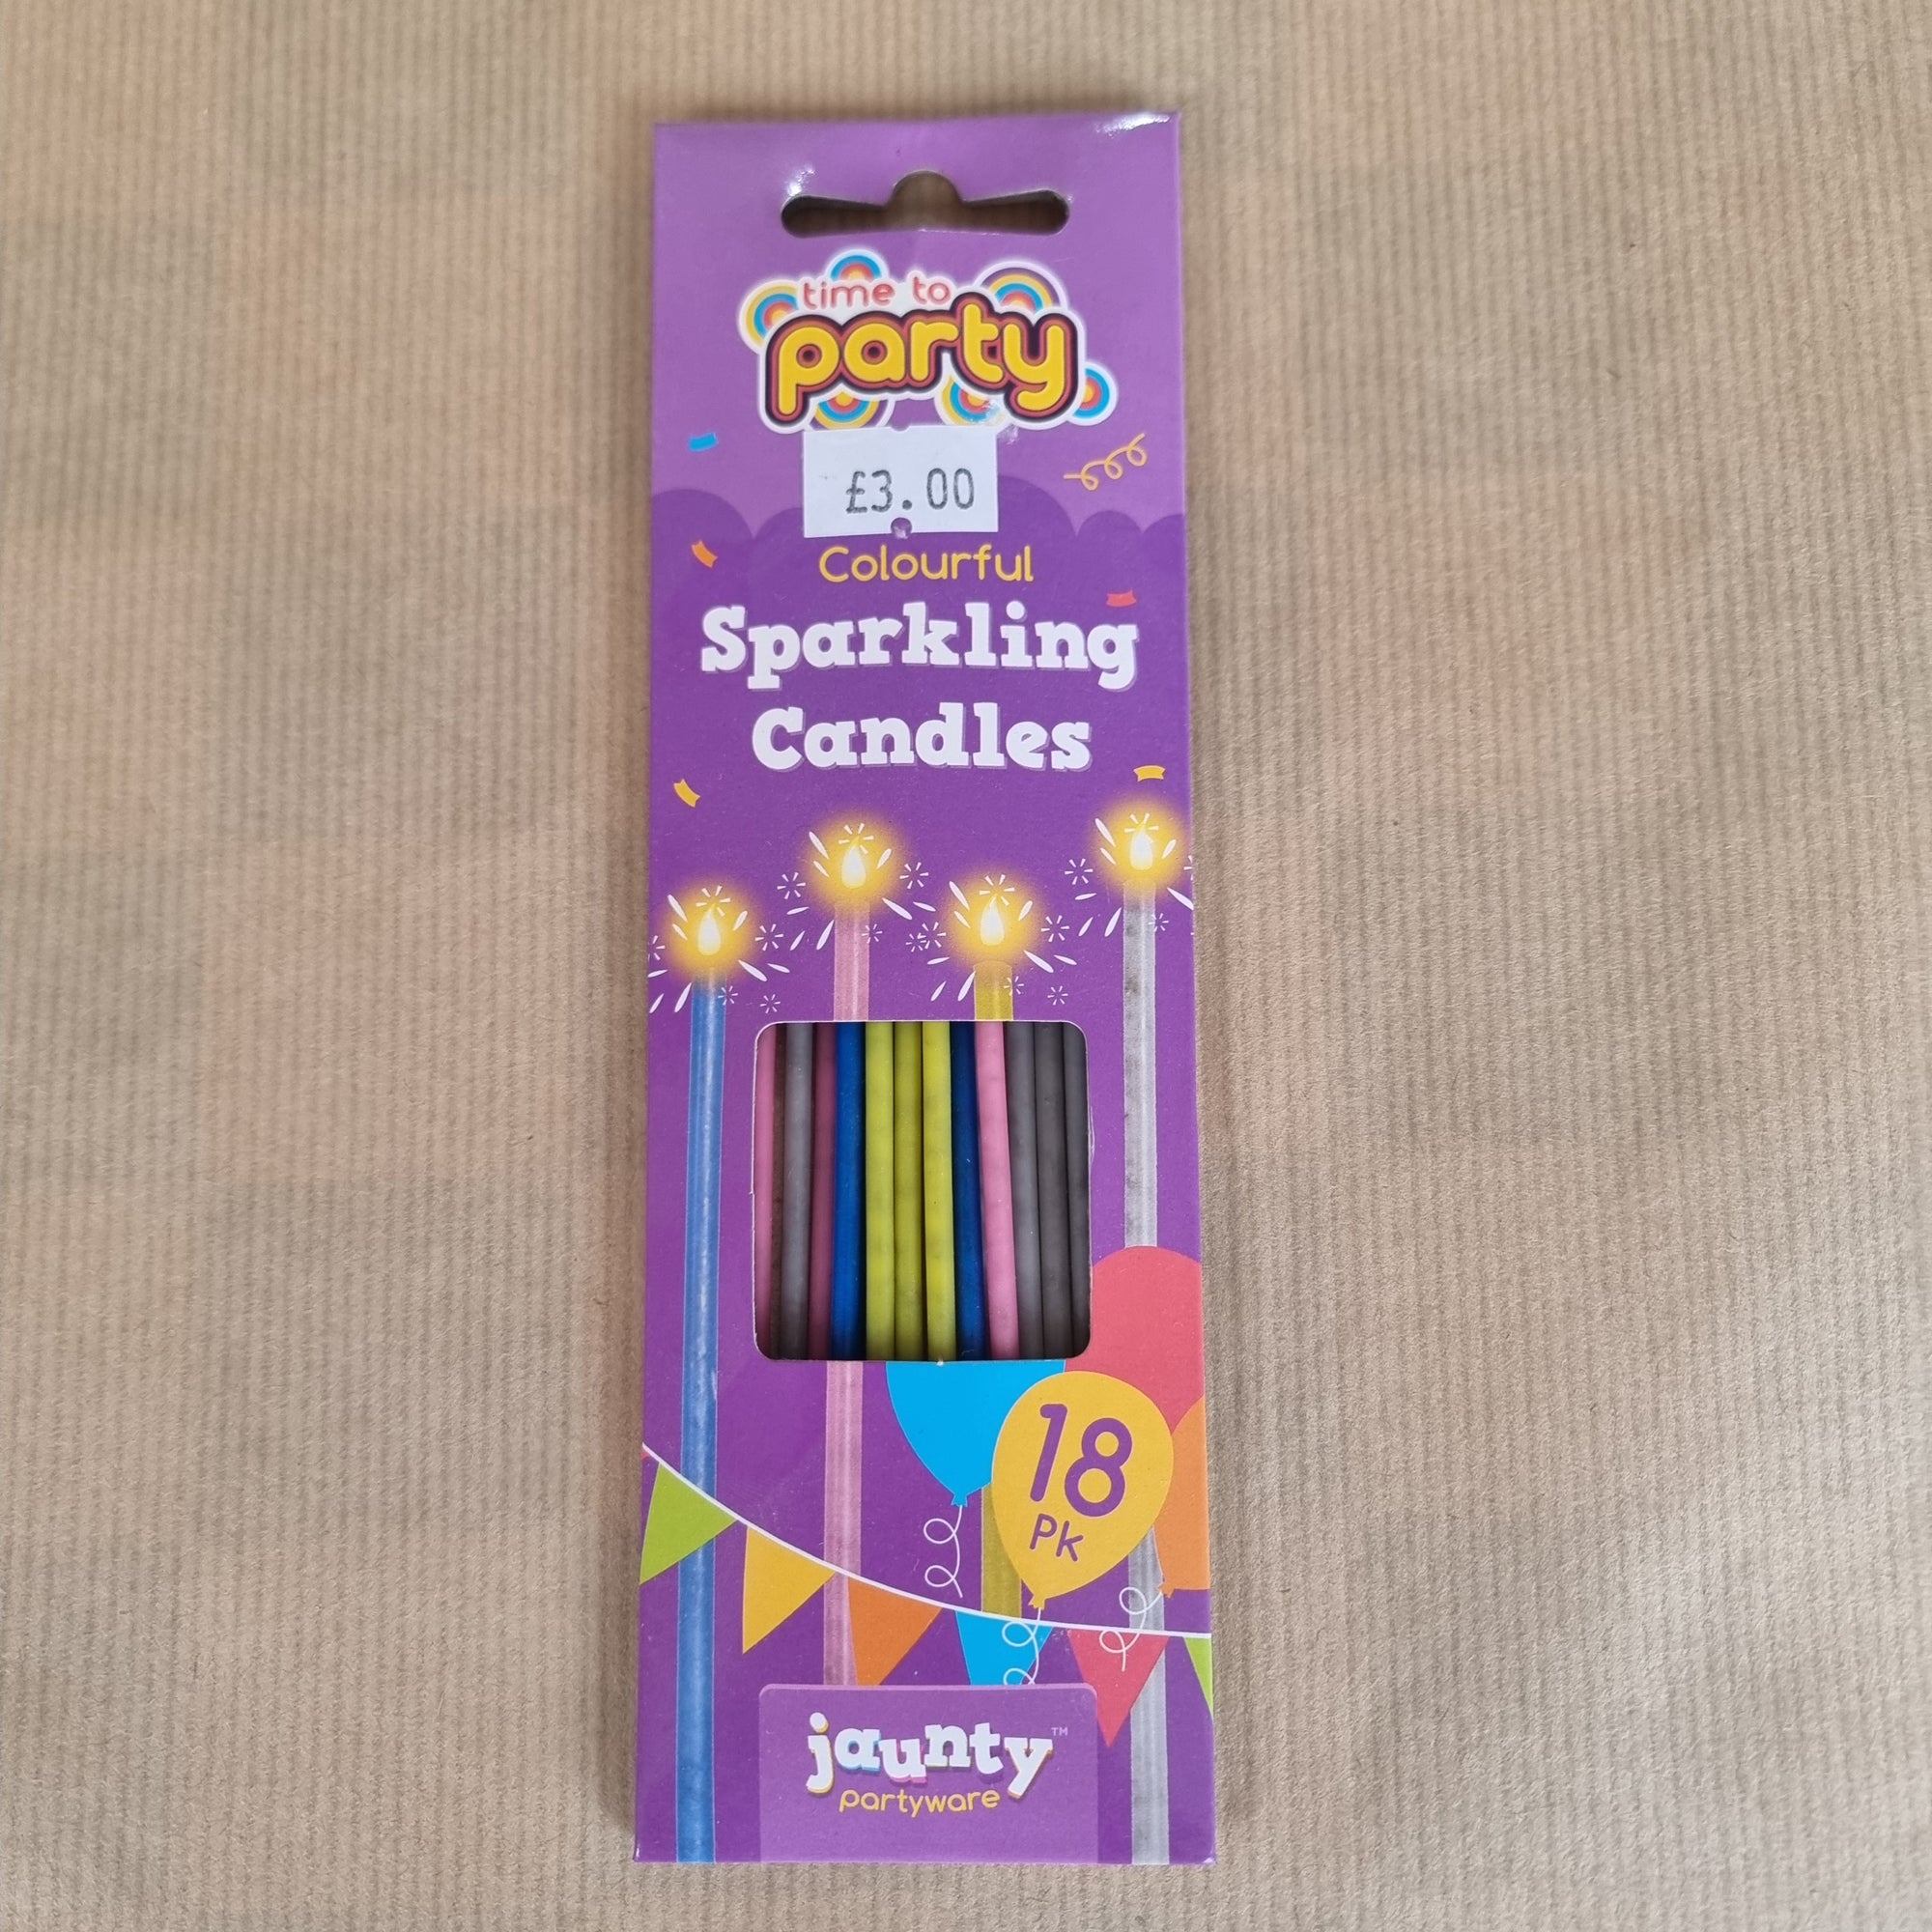 Colourful Sparkling Candles